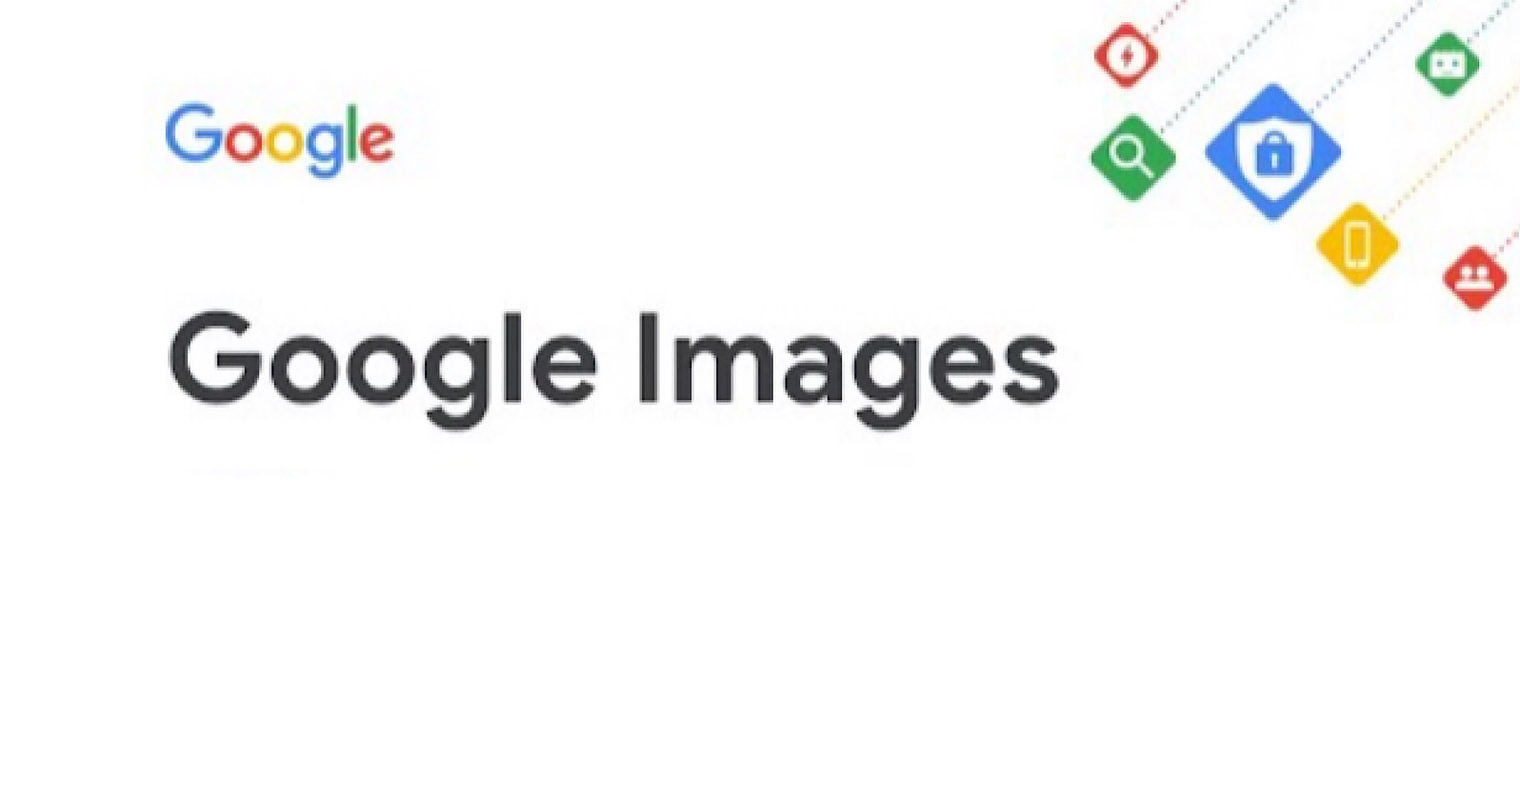 Google SEO 101: Image Search Best Practices & Changes Over the Years